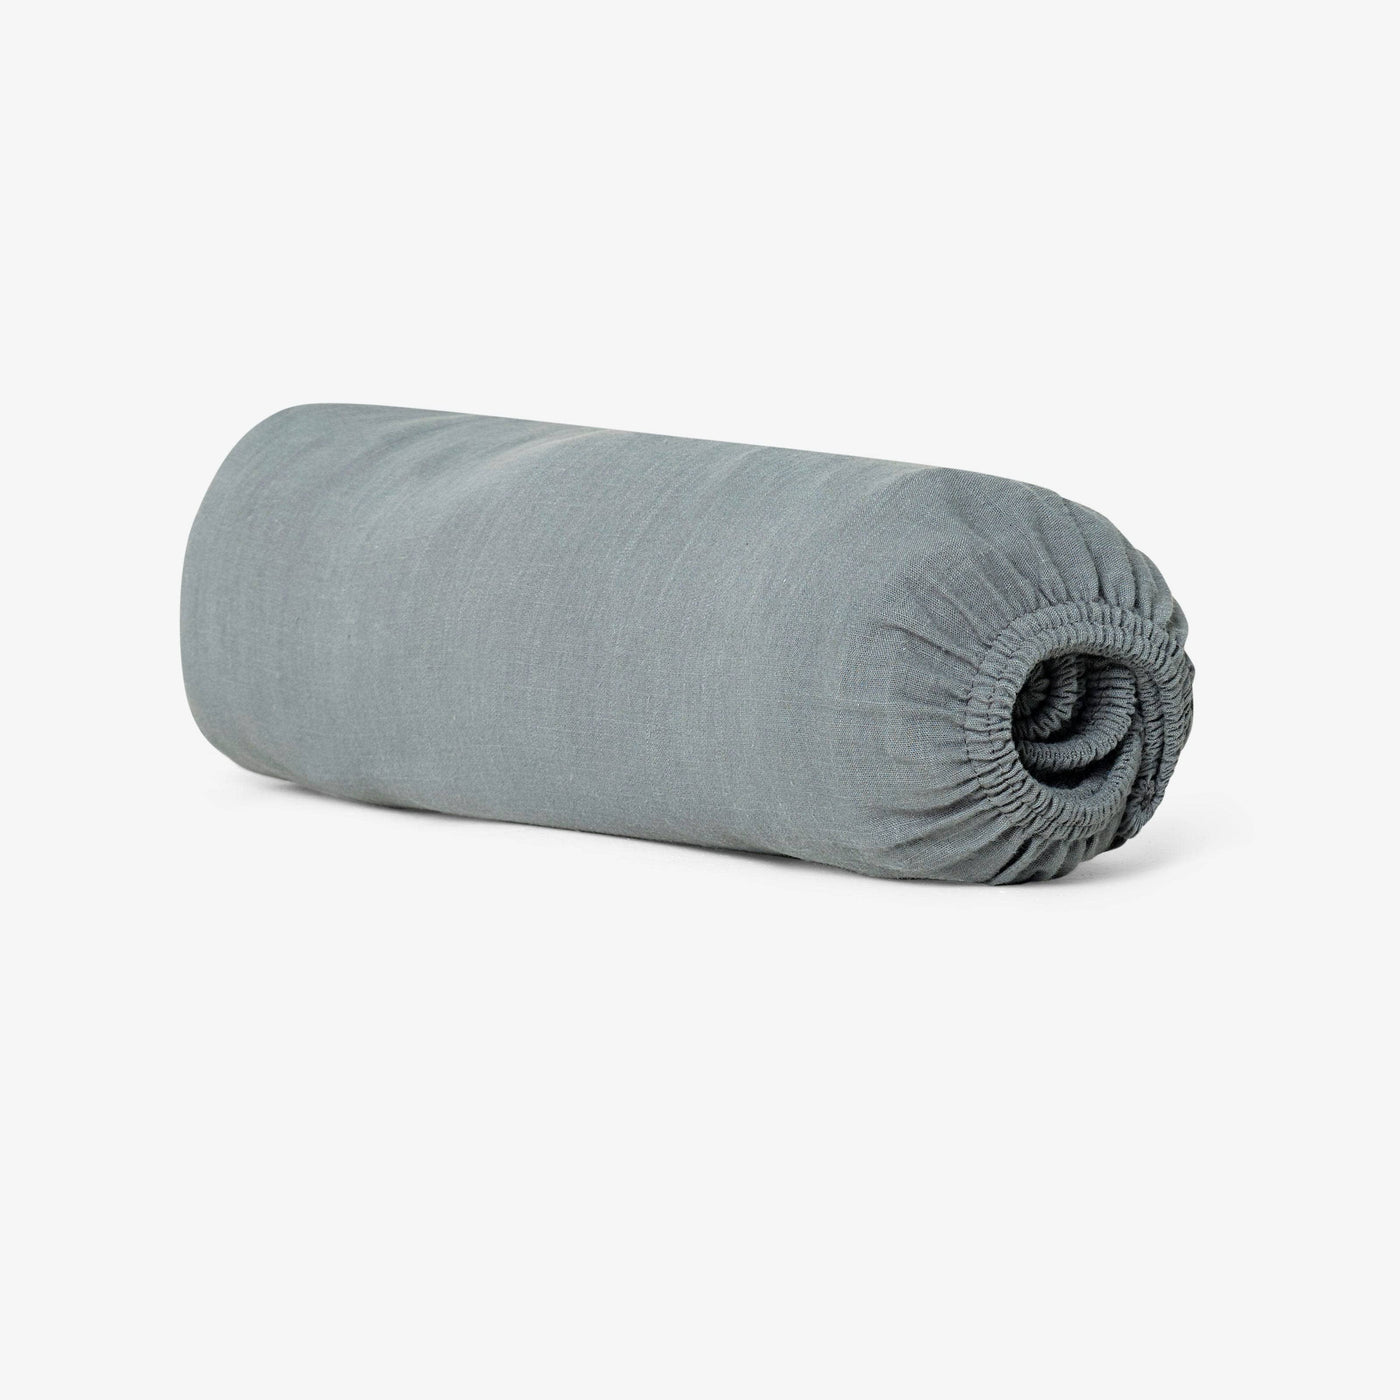 Ruby 100% Turkish Cotton Fitted Sheet, Anthracite Grey, King Size 3